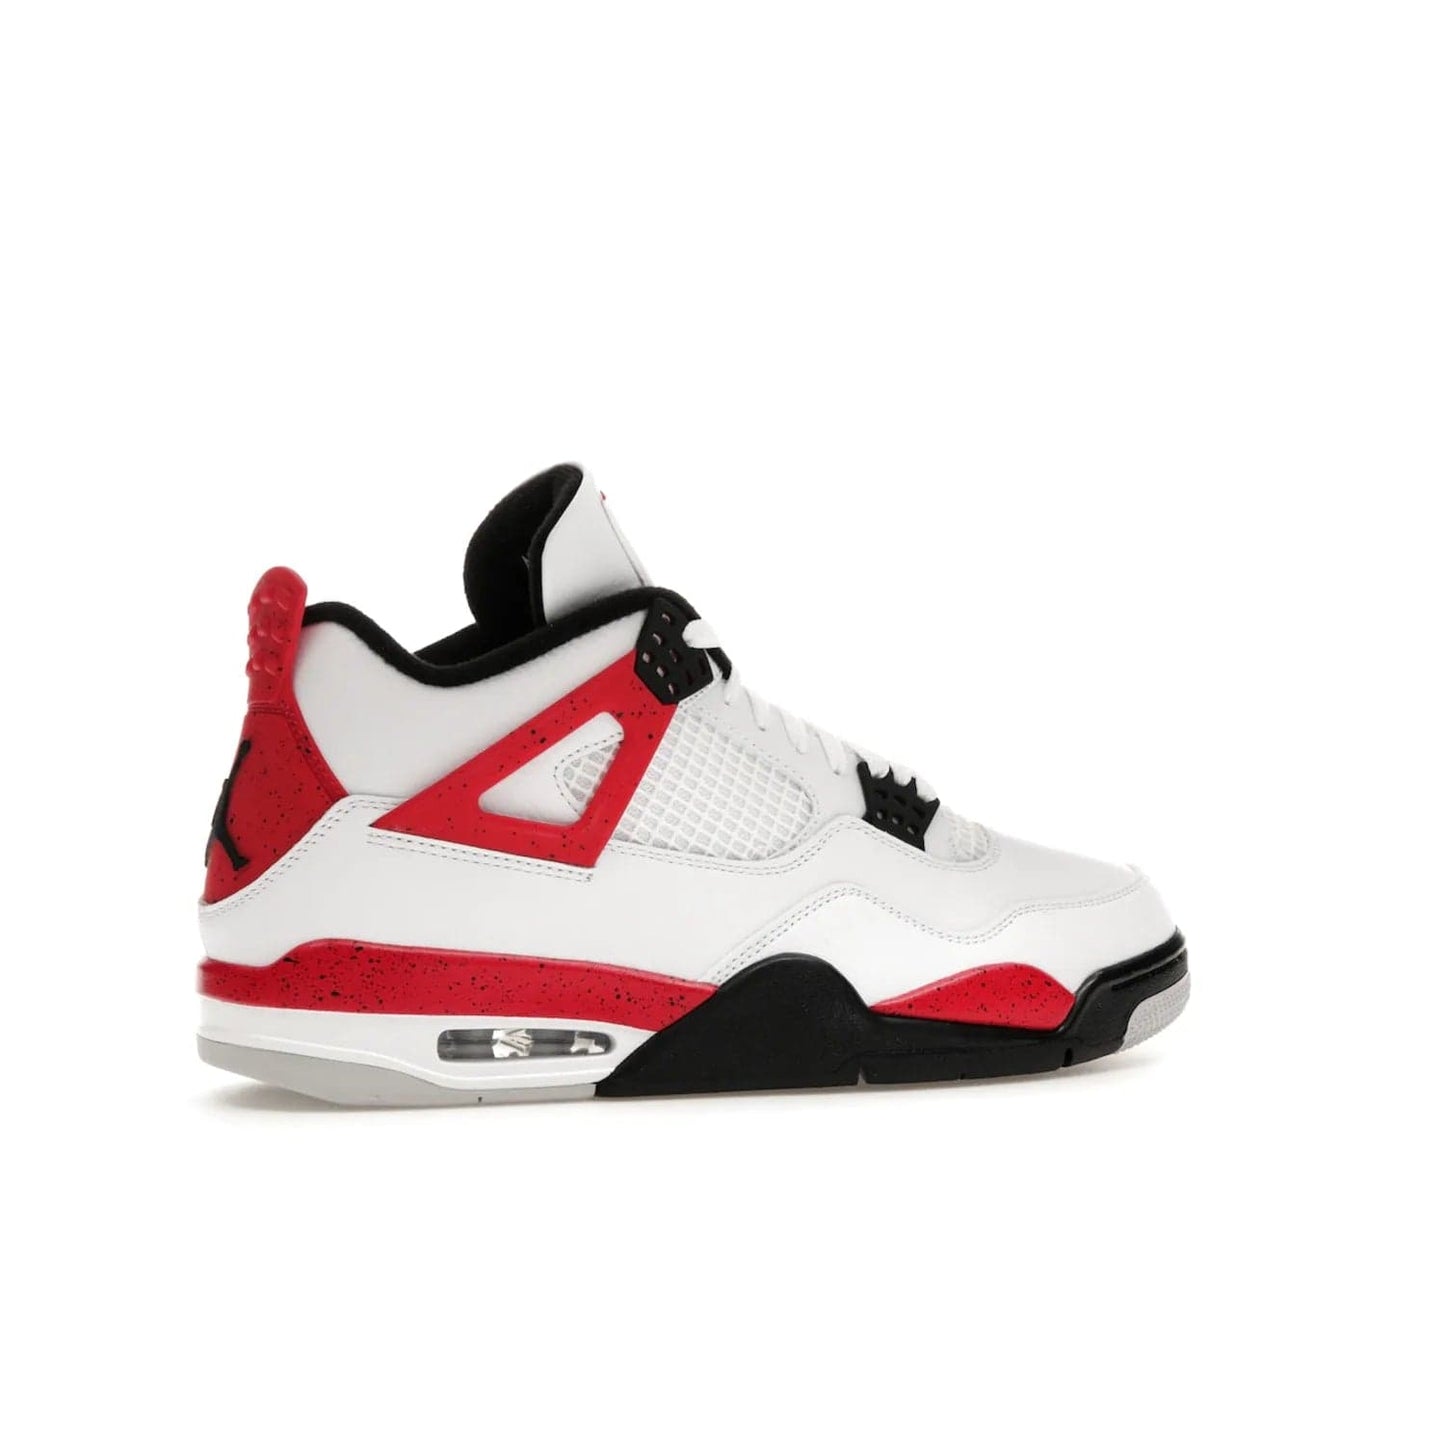 Jordan 4 Retro Red Cement - Image 35 - Only at www.BallersClubKickz.com - Iconic Jordan silhouette with a unique twist. White premium leather uppers with fire red and black detailing. Black, white, and fire red midsole with mesh detailing and Jumpman logo. Jordan 4 Retro Red Cement released with premium price.